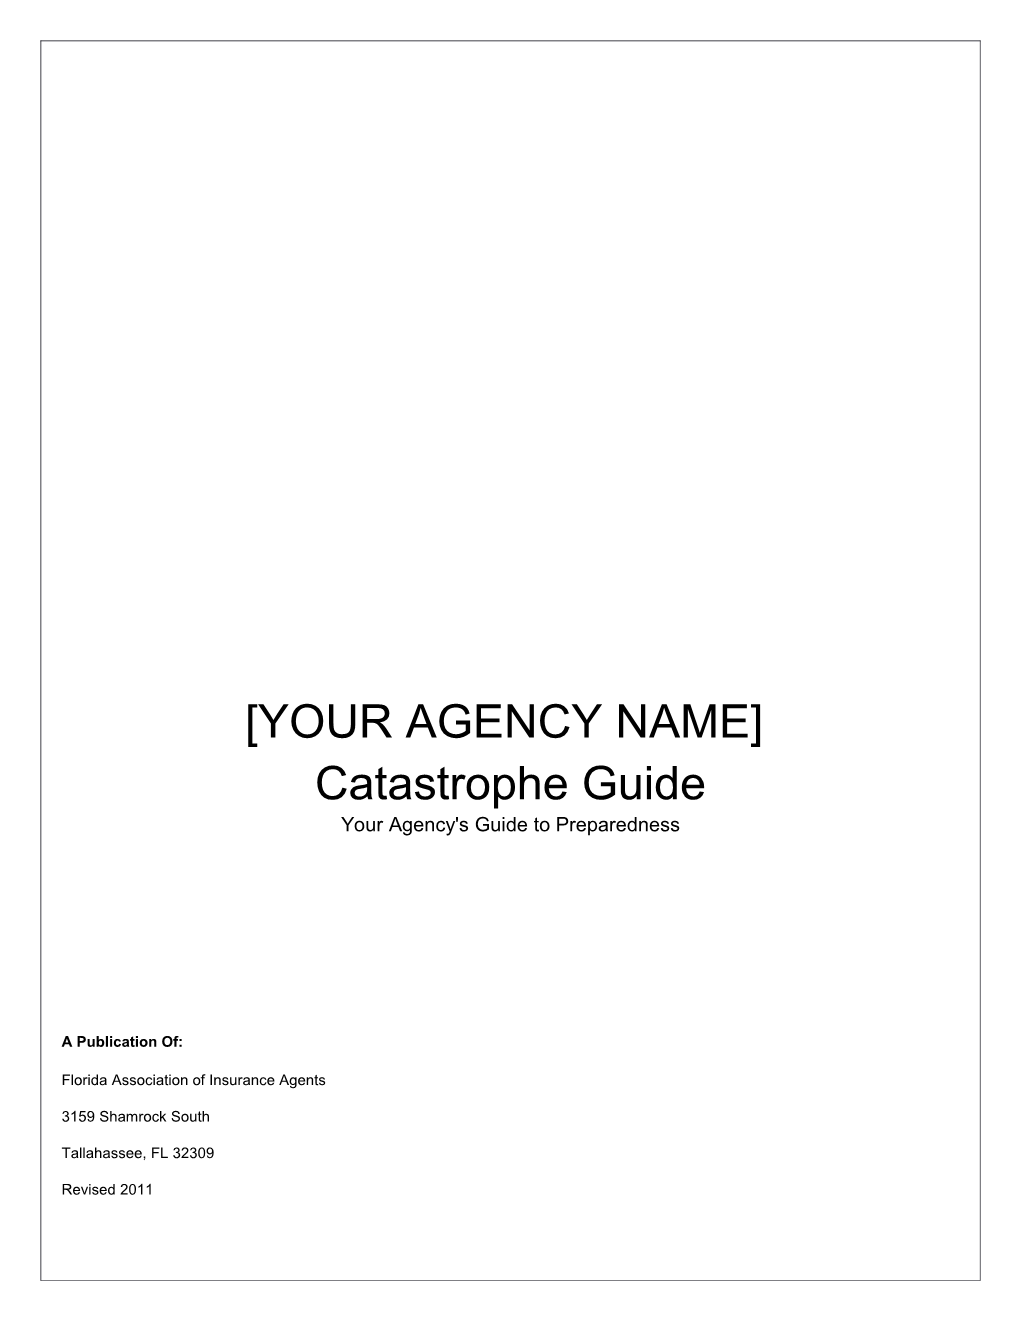 Agency Catastrophe Guide